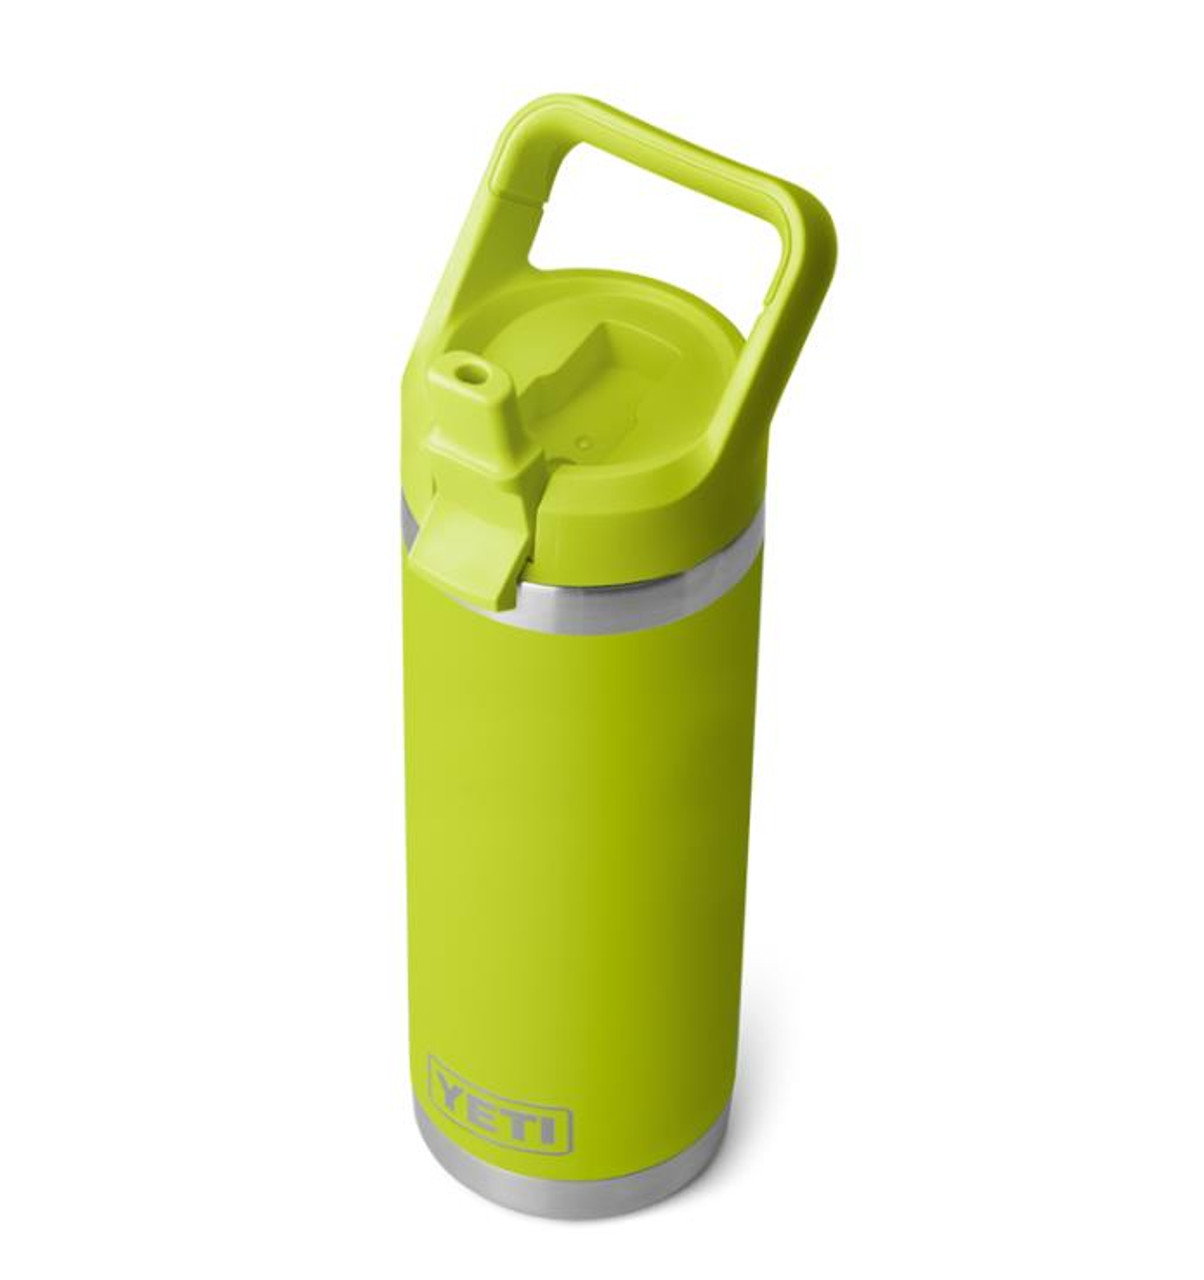 https://cdn11.bigcommerce.com/s-d4f5hm3/images/stencil/1280x1280/products/66827/170186/Yeti-Rambler-18-Straw-Bottle-Chartreuse-888830277010_image1__29235.1701764411.jpg?c=2